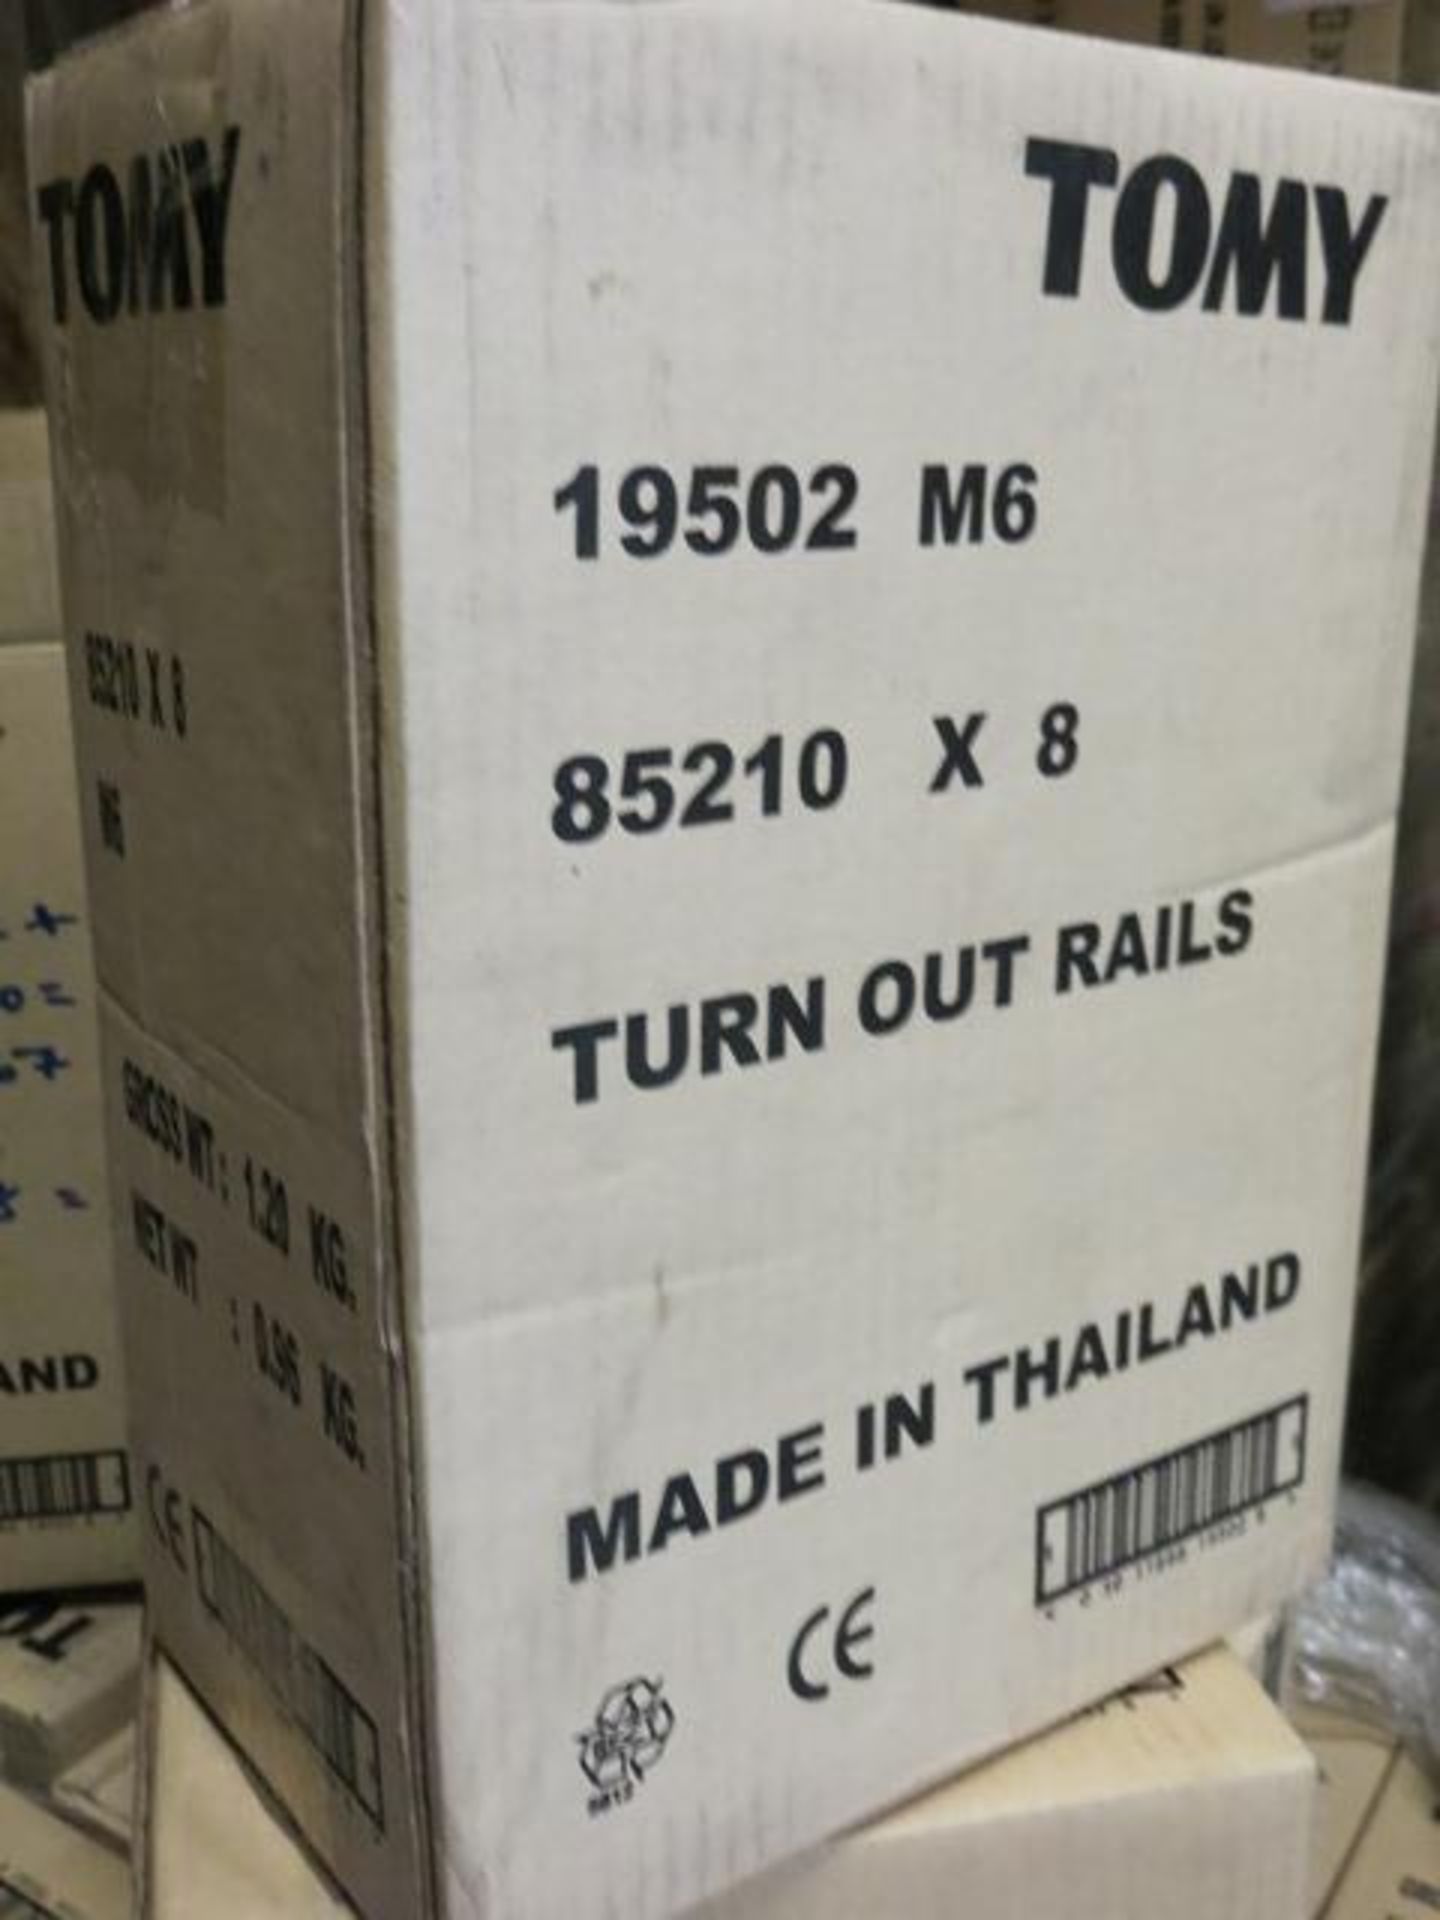 One Hundred & Eighty Boxes 8 per box (1,440 units) of Tomy Turn Out Rails 4 to 7 years 19502 M6 - Bild 2 aus 2